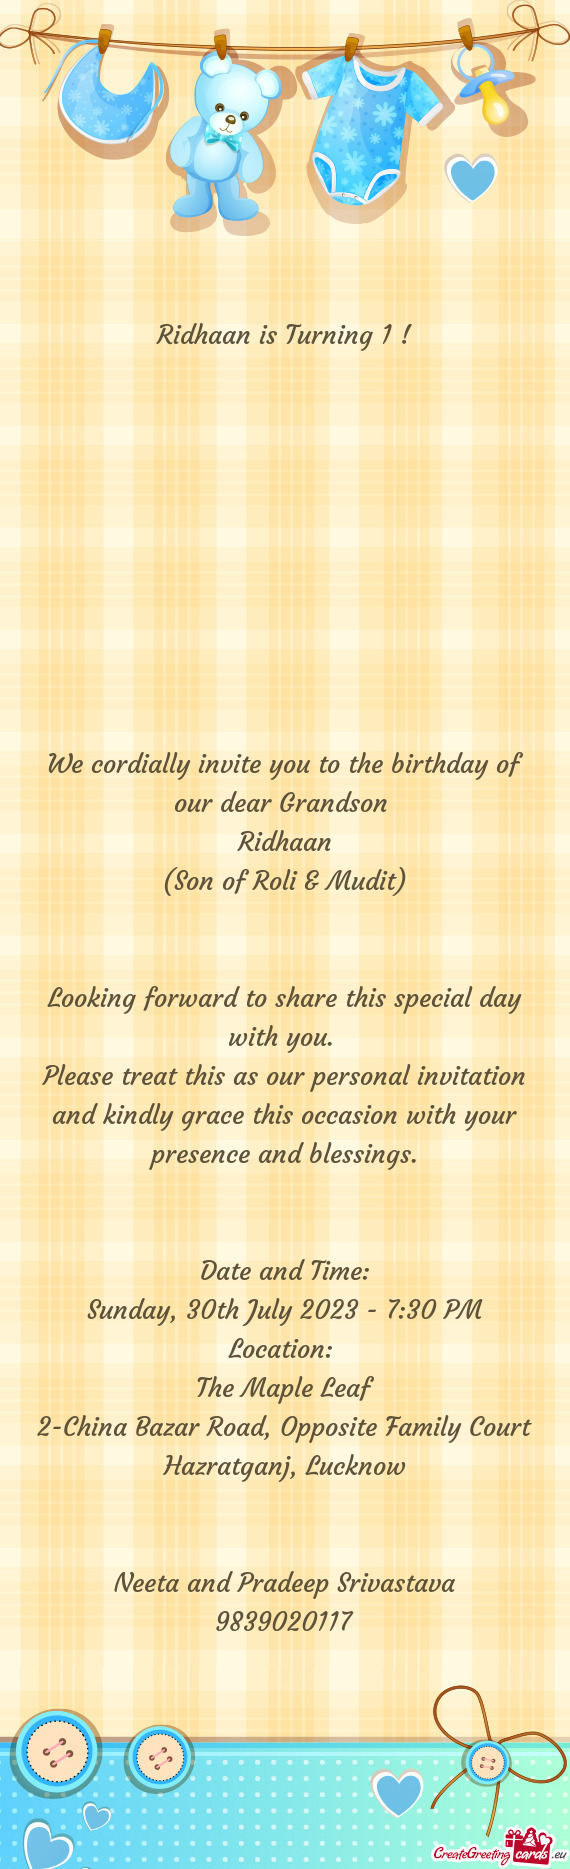 We cordially invite you to the birthday of our dear Grandson